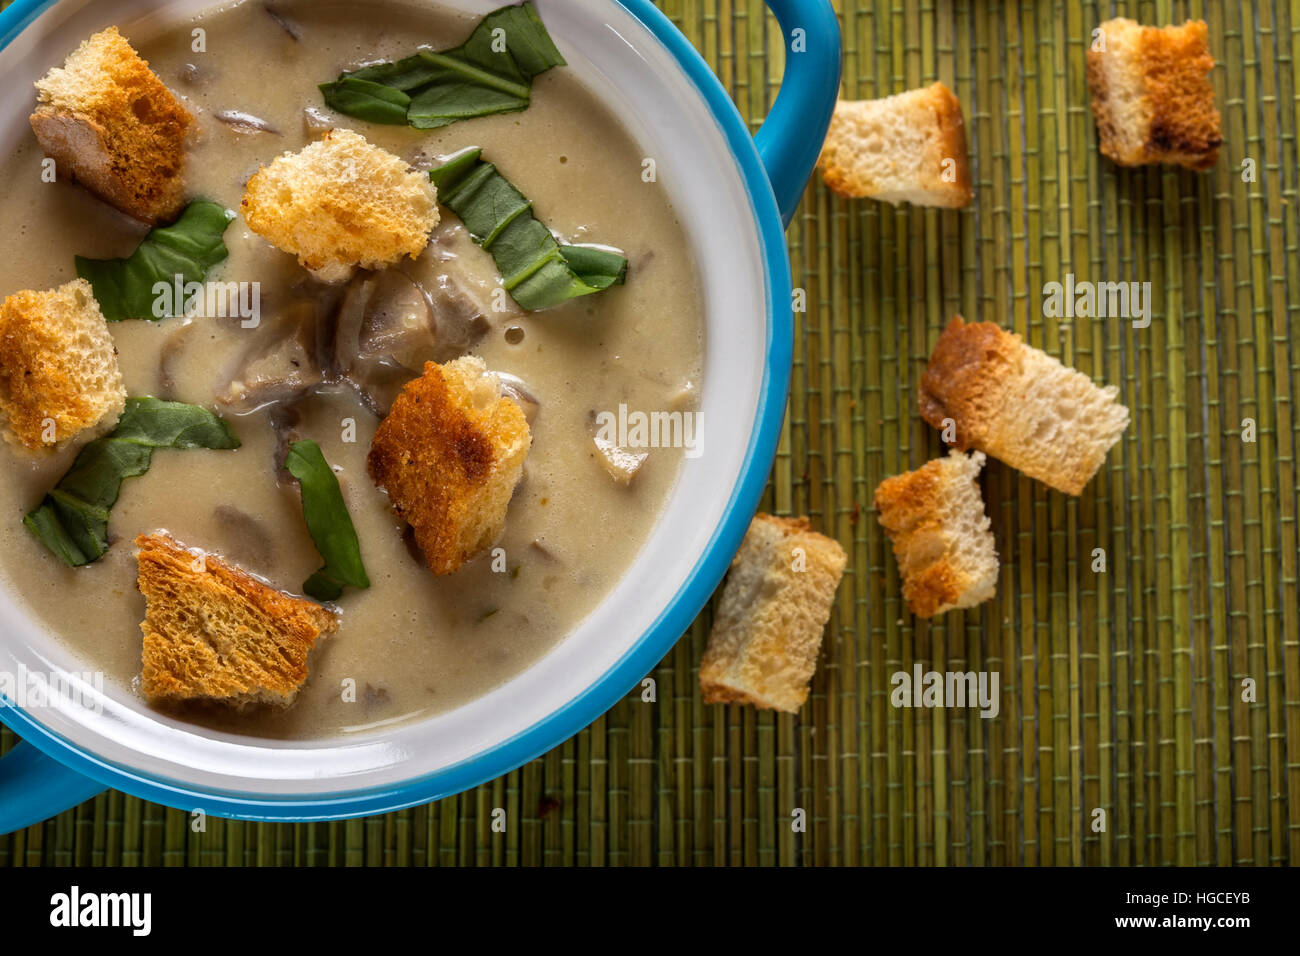 Mushroom cream soup in ceramic bowl and croutons on table Stock Photo